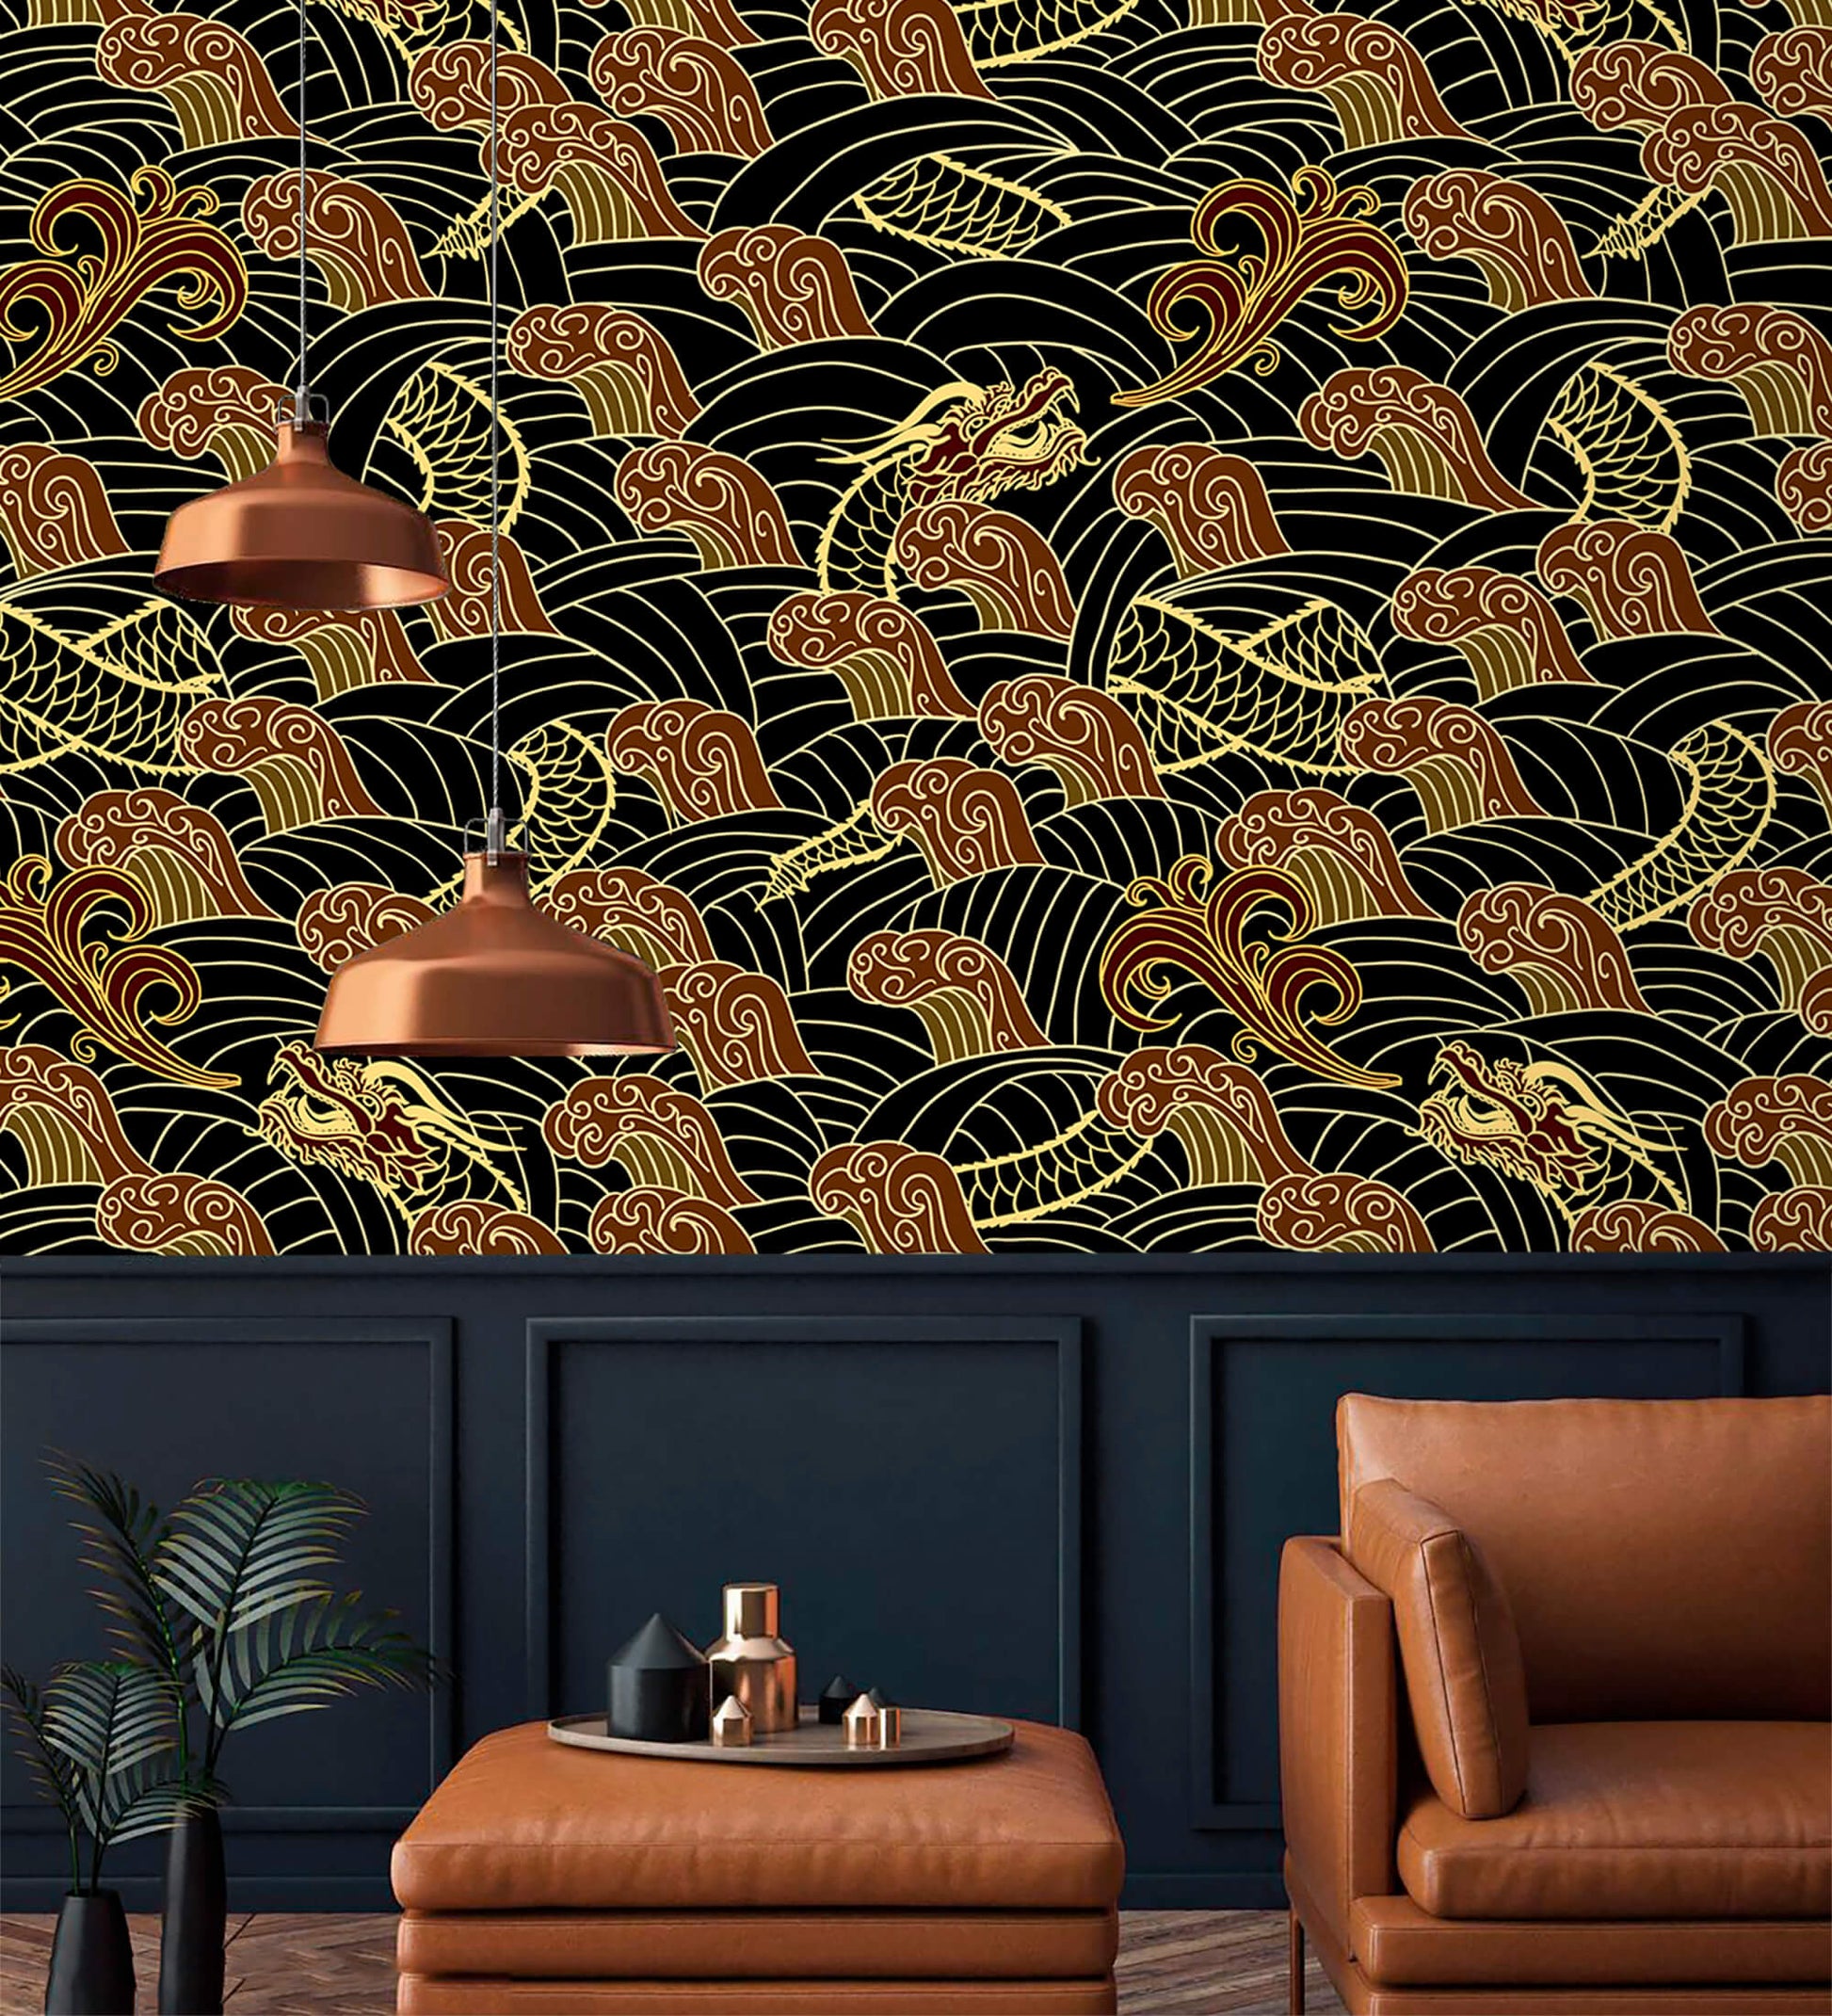 Golden Dragon Waves Wallpaper: Invite the mystique of the East into your space with this captivating design, featuring golden dragons amidst swirling waves, evoking a sense of power and elegance, perfect for creating a statement in any room.